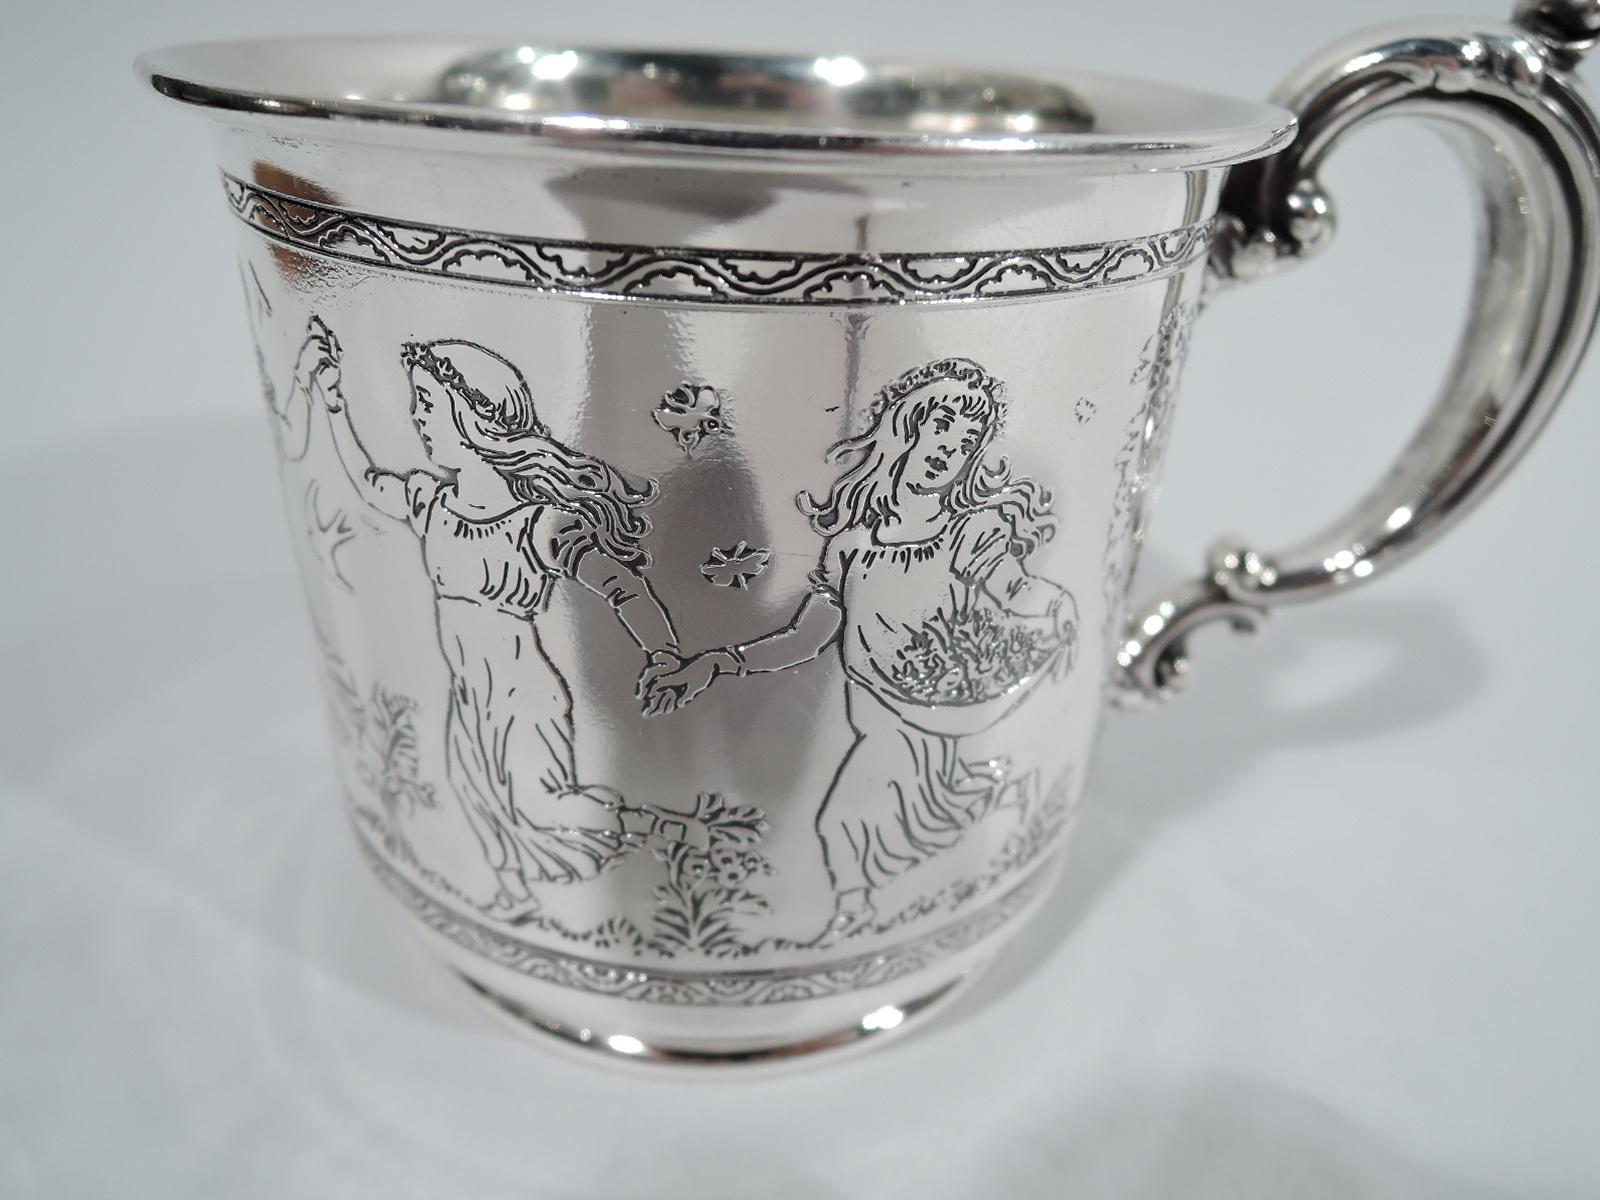 Edwardian Art Nouveau sterling silver baby cup. Made by Reed & Barton in Taunton, Mass., circa 1910. Straight sides and short inset foot; leaf-capped double-scroll handle. Acid-etched frieze depicting Botticelli-inspired nymphs holding hands and